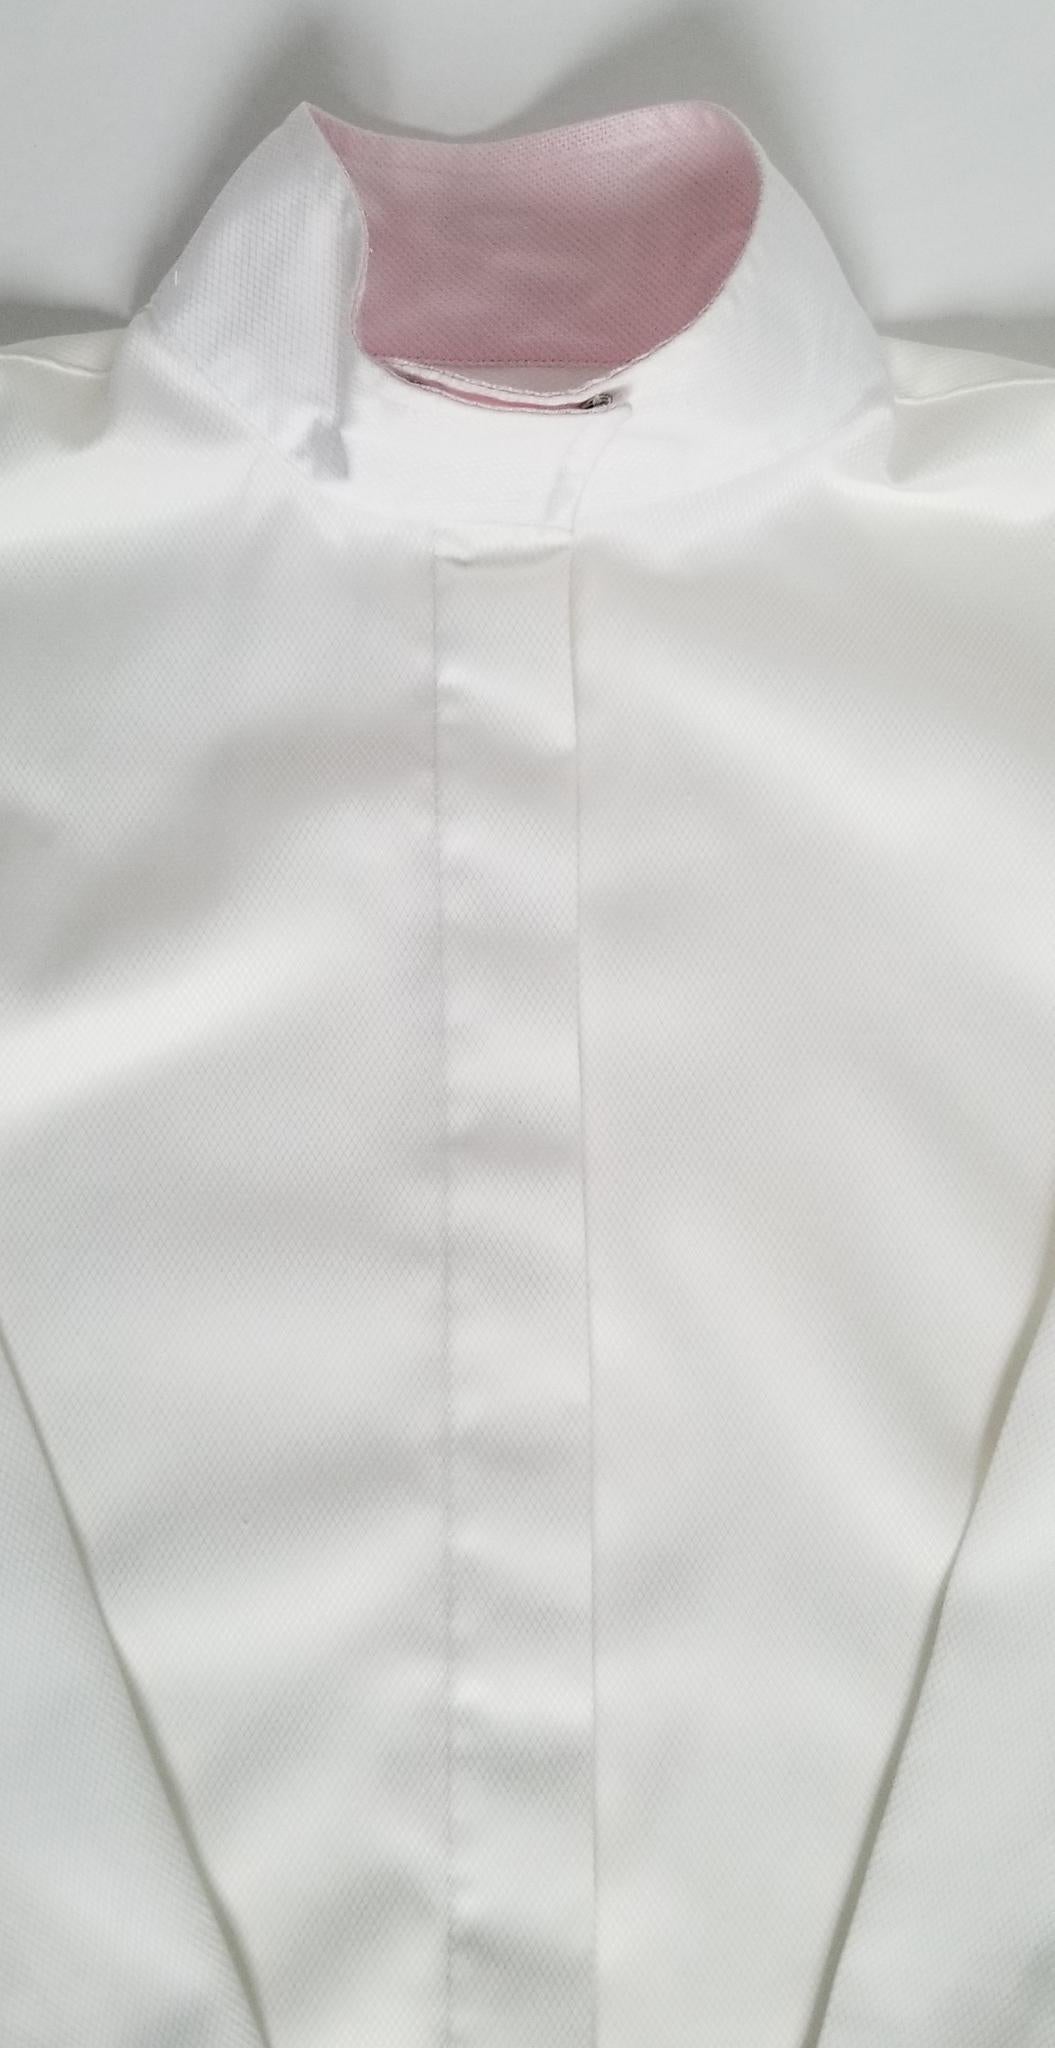 The Tailored Sportsman Coolmax Show Shirt - White - Women's Size 2 (Small)